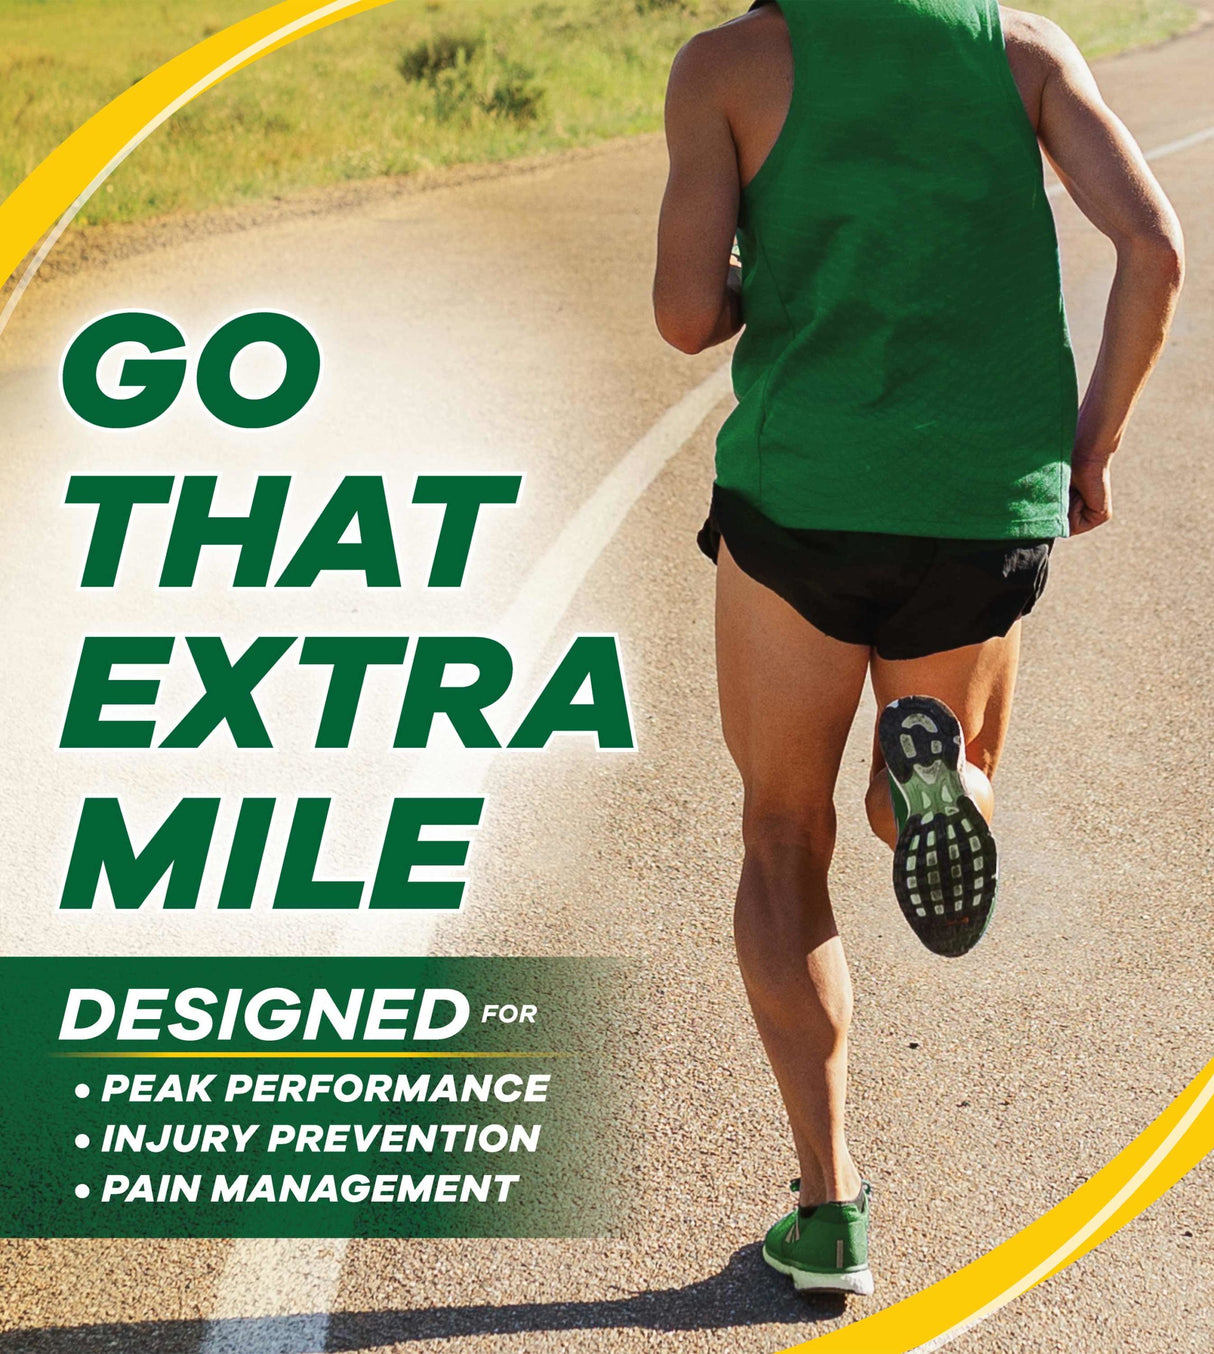 Image of person jogging while wearing Dr. Scholl's Performance Running Insoles